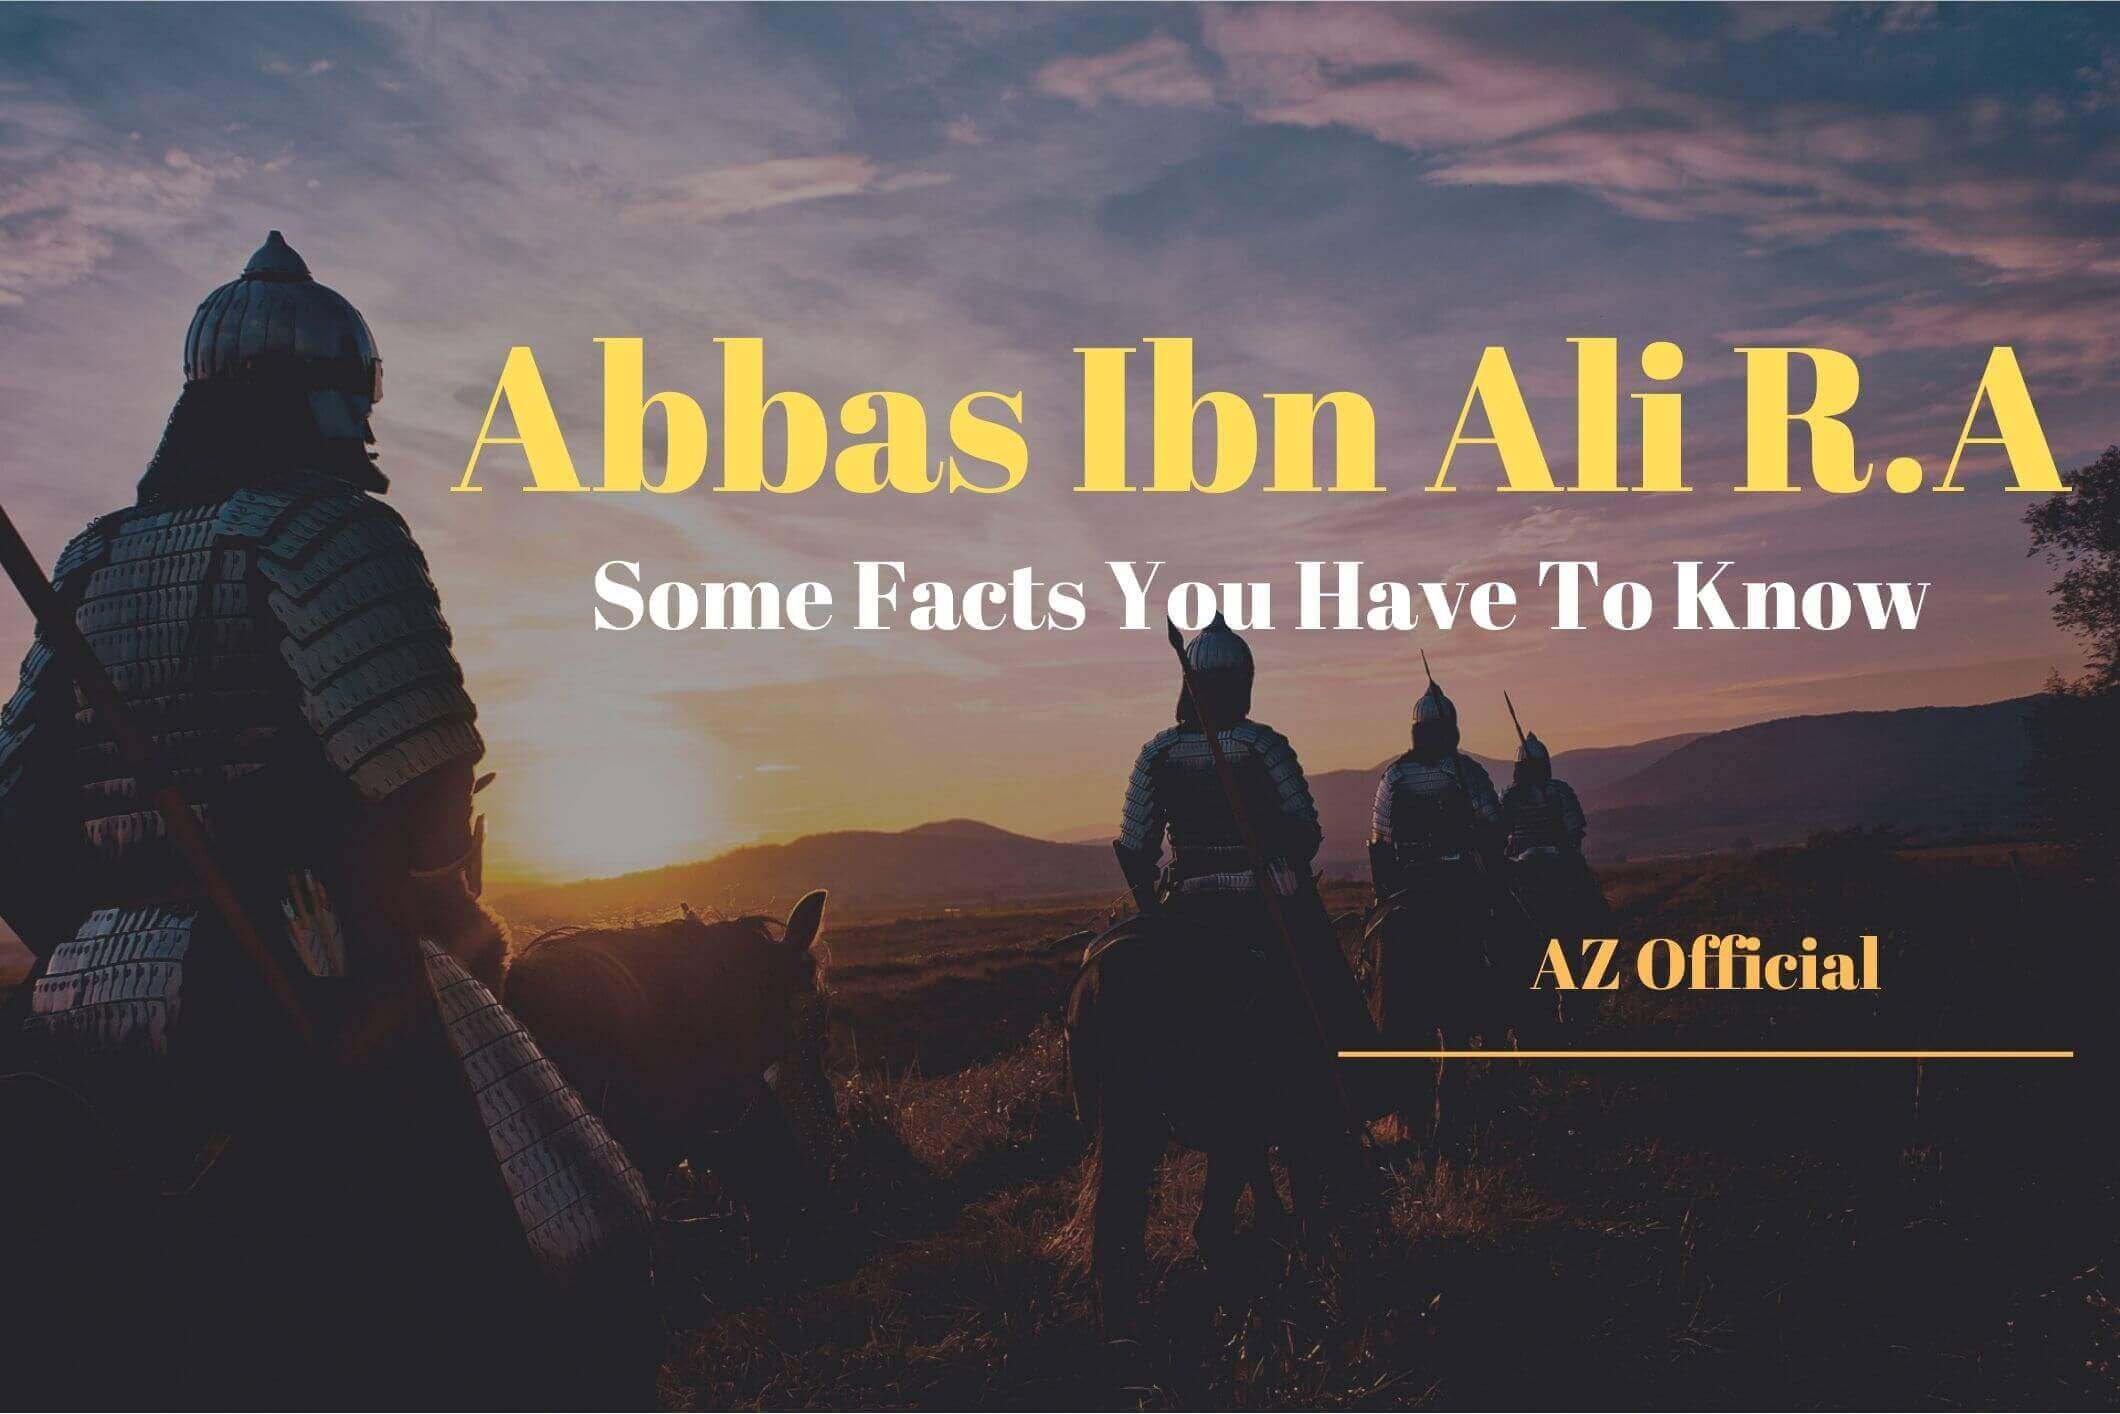 Abbas ibn Ali (R.A) Some Facts You Have To Know